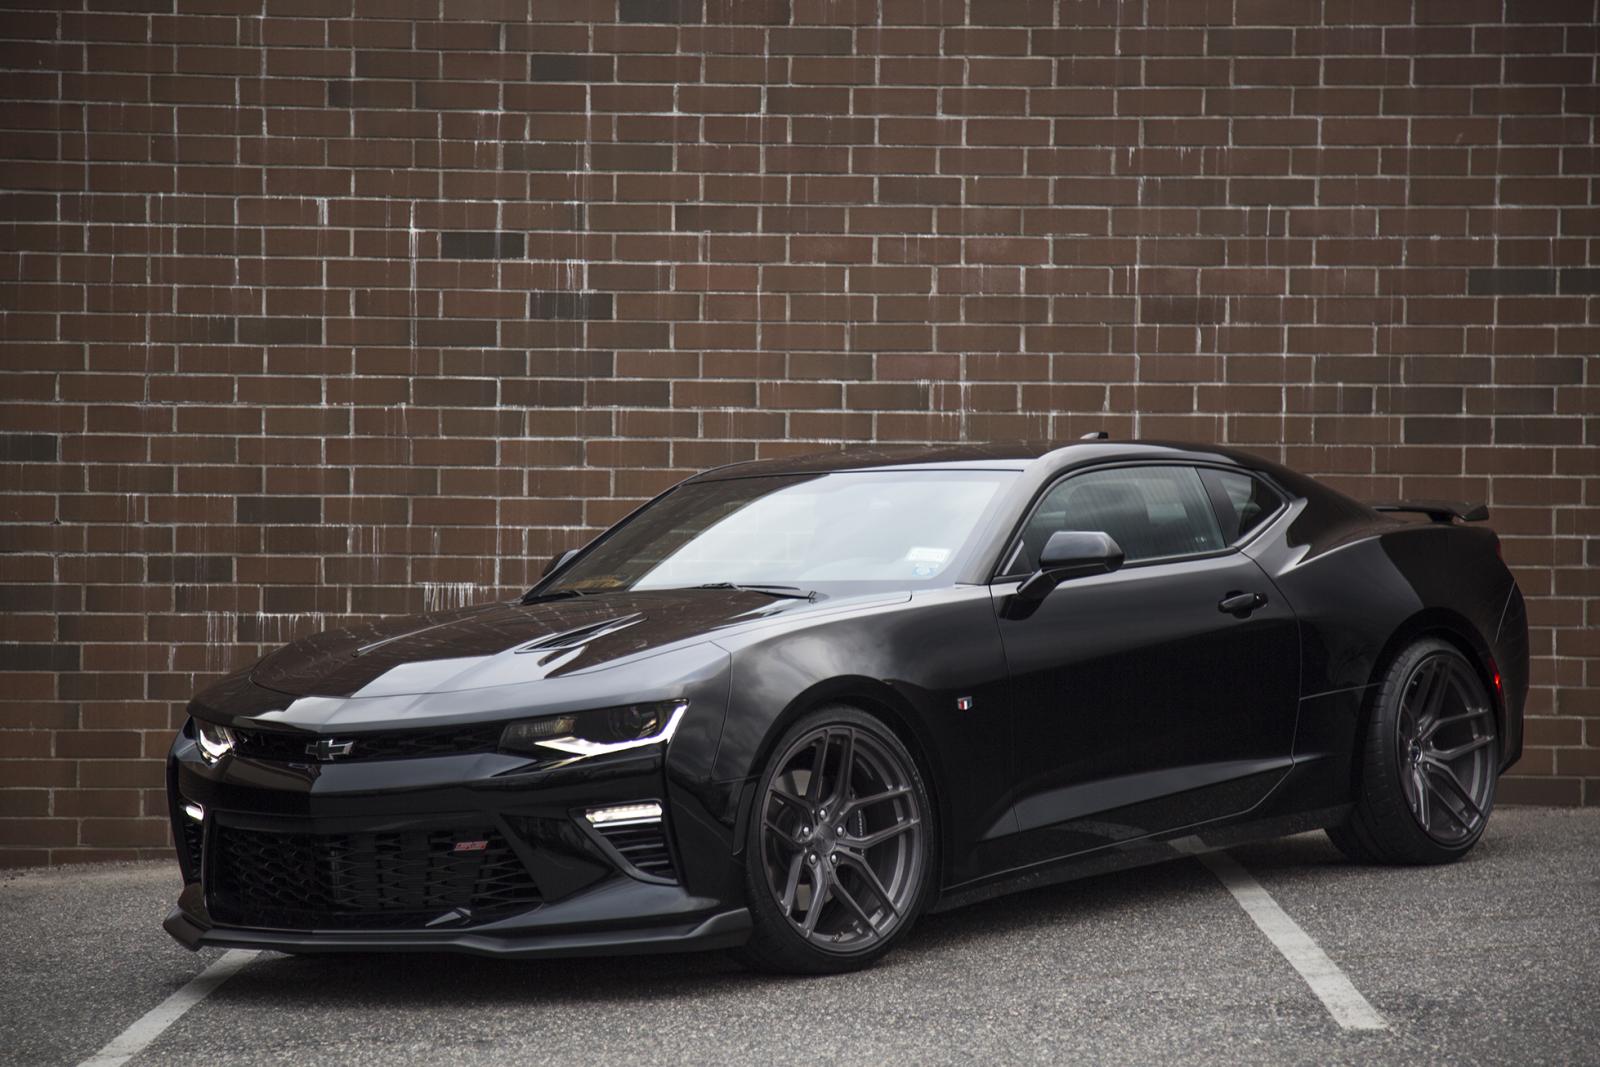 Submit pics of your lowered 6th gen - Page 2 - CAMARO6